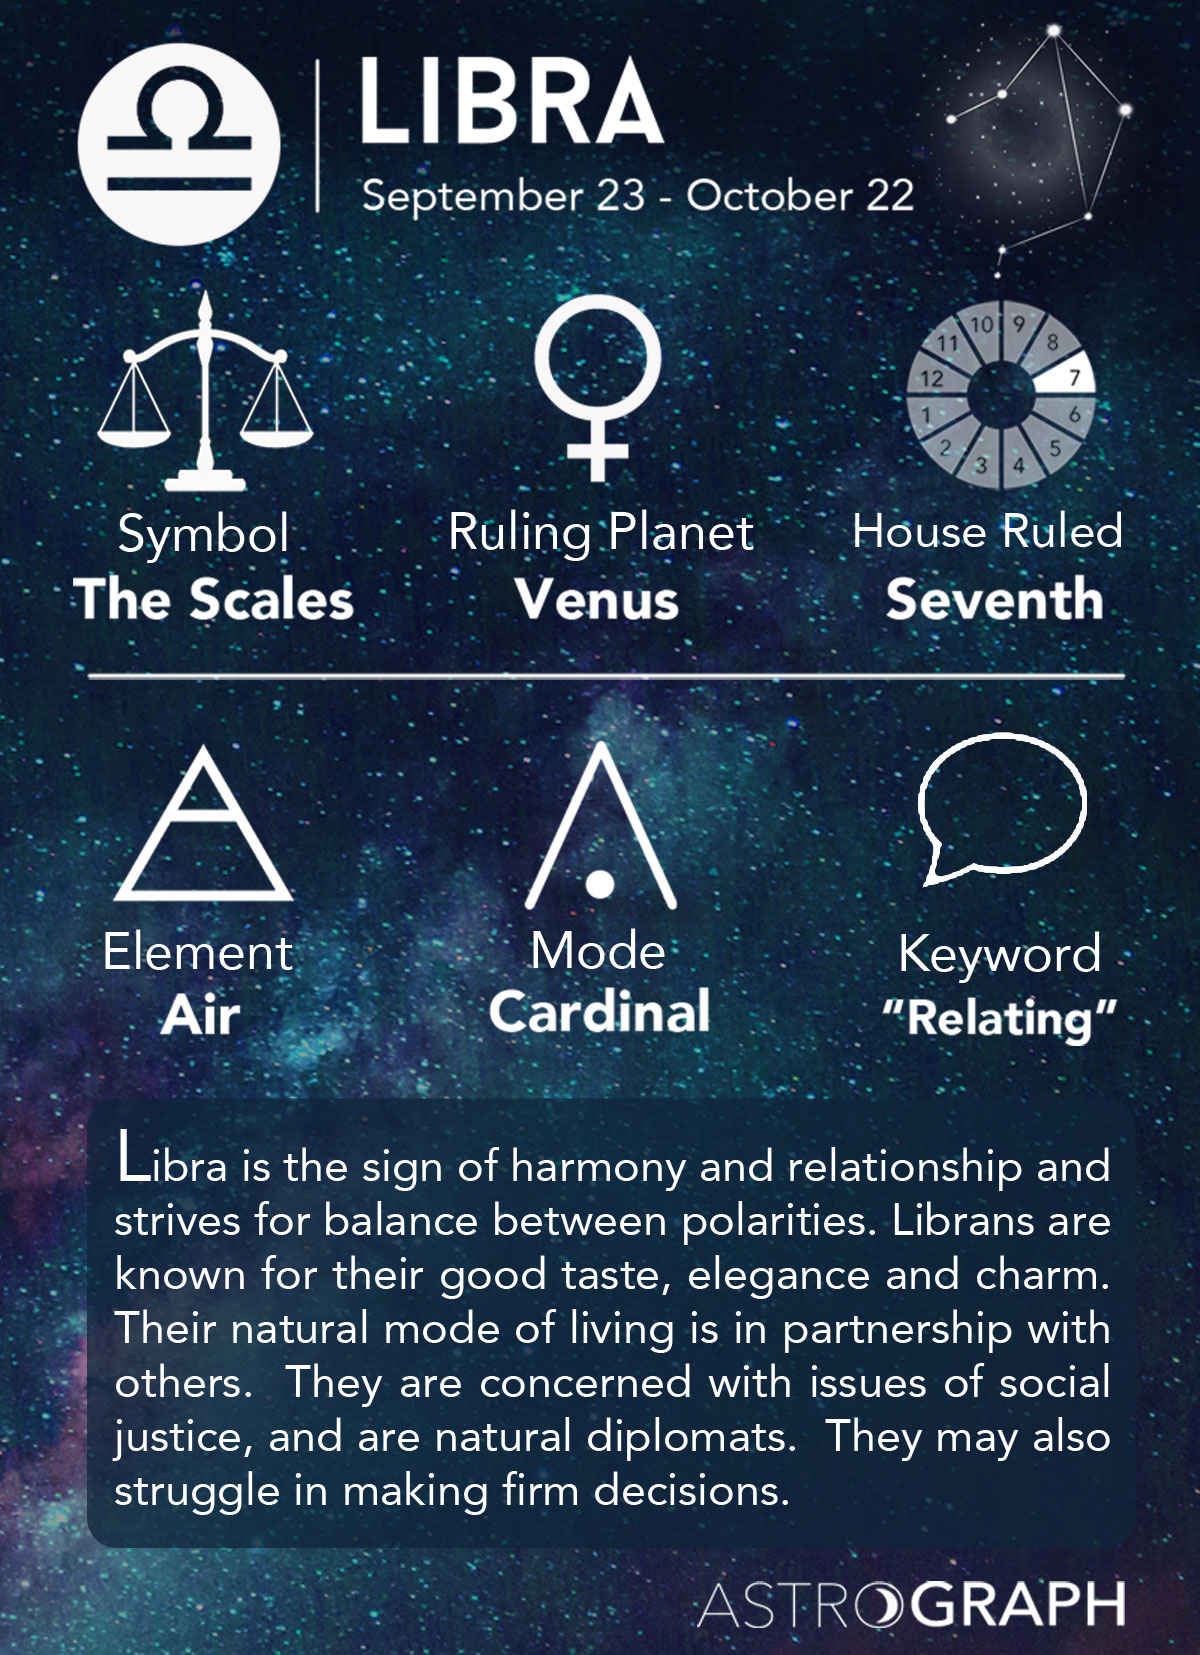 What Is A Libra?